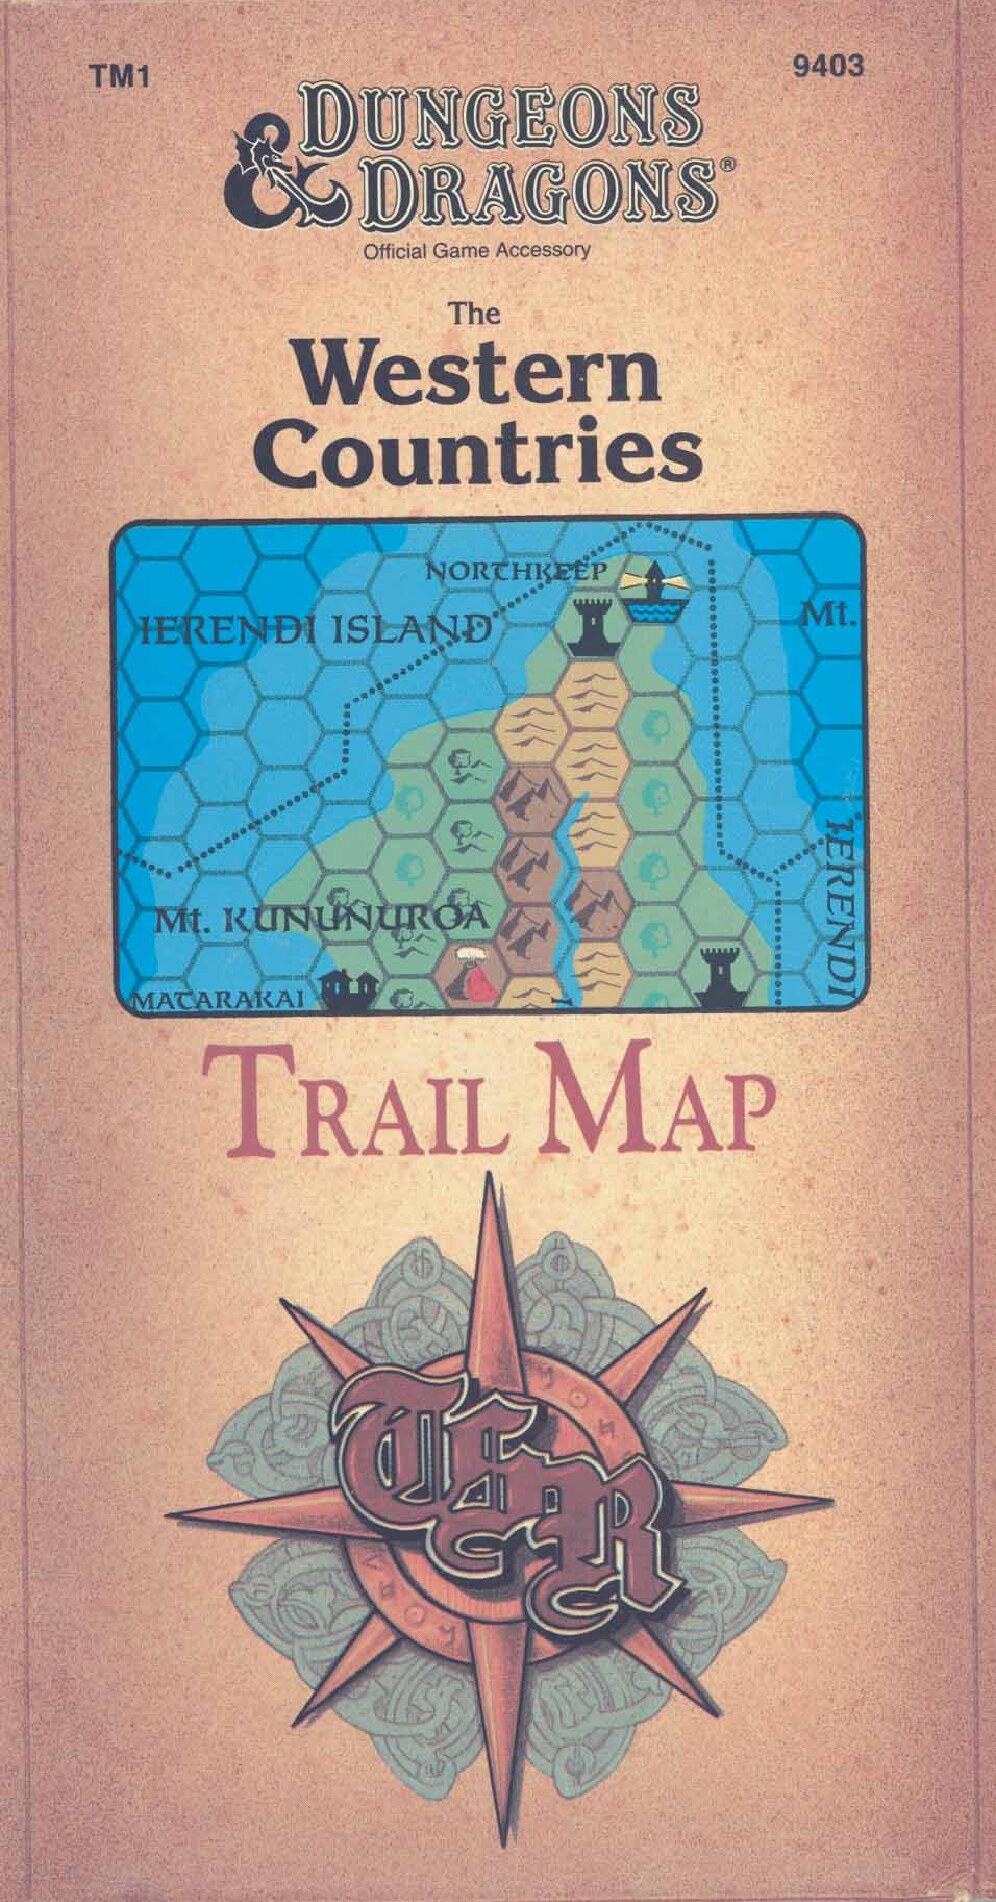 TSR 9403 TM1 The Western Countries Trail Map